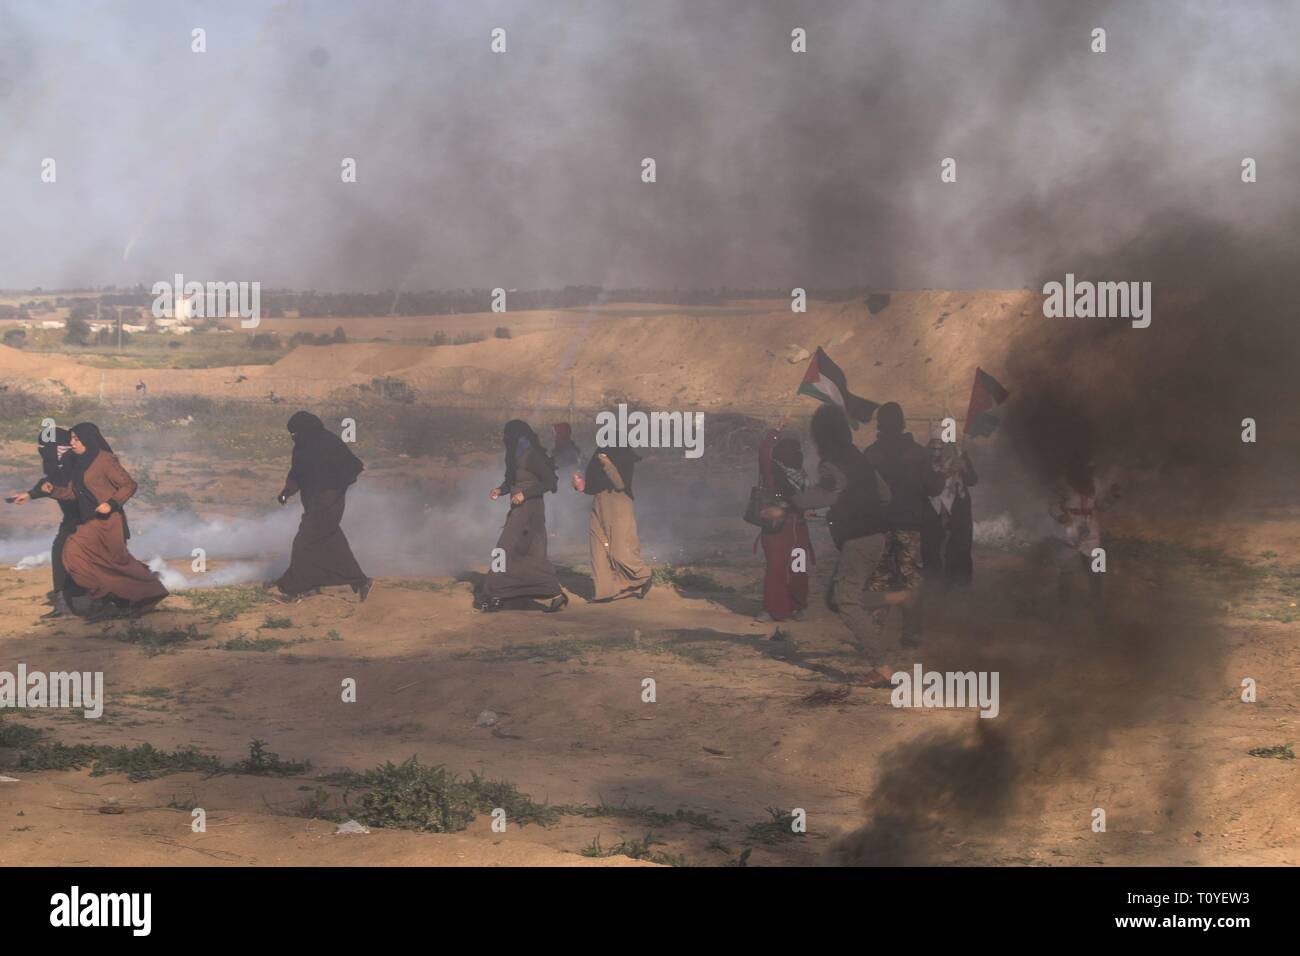 March 22, 2019 - Al-Buraj Refugee Camp, The Gaza Strip, Palestine - Clashes between Palestinians and Israeli troops at al-Buraj refugee camp in central of the Gaza Strip, Palestinian Health Ministry in Gaza confirmed that 30 Palestinians were shot and injured with Israeli live fire, while dozens of others suffered from tear-gas inhalation, including a number of health workers. Credit: Mahmoud Khattab/Quds Net News/ZUMA Wire/Alamy Live News Stock Photo